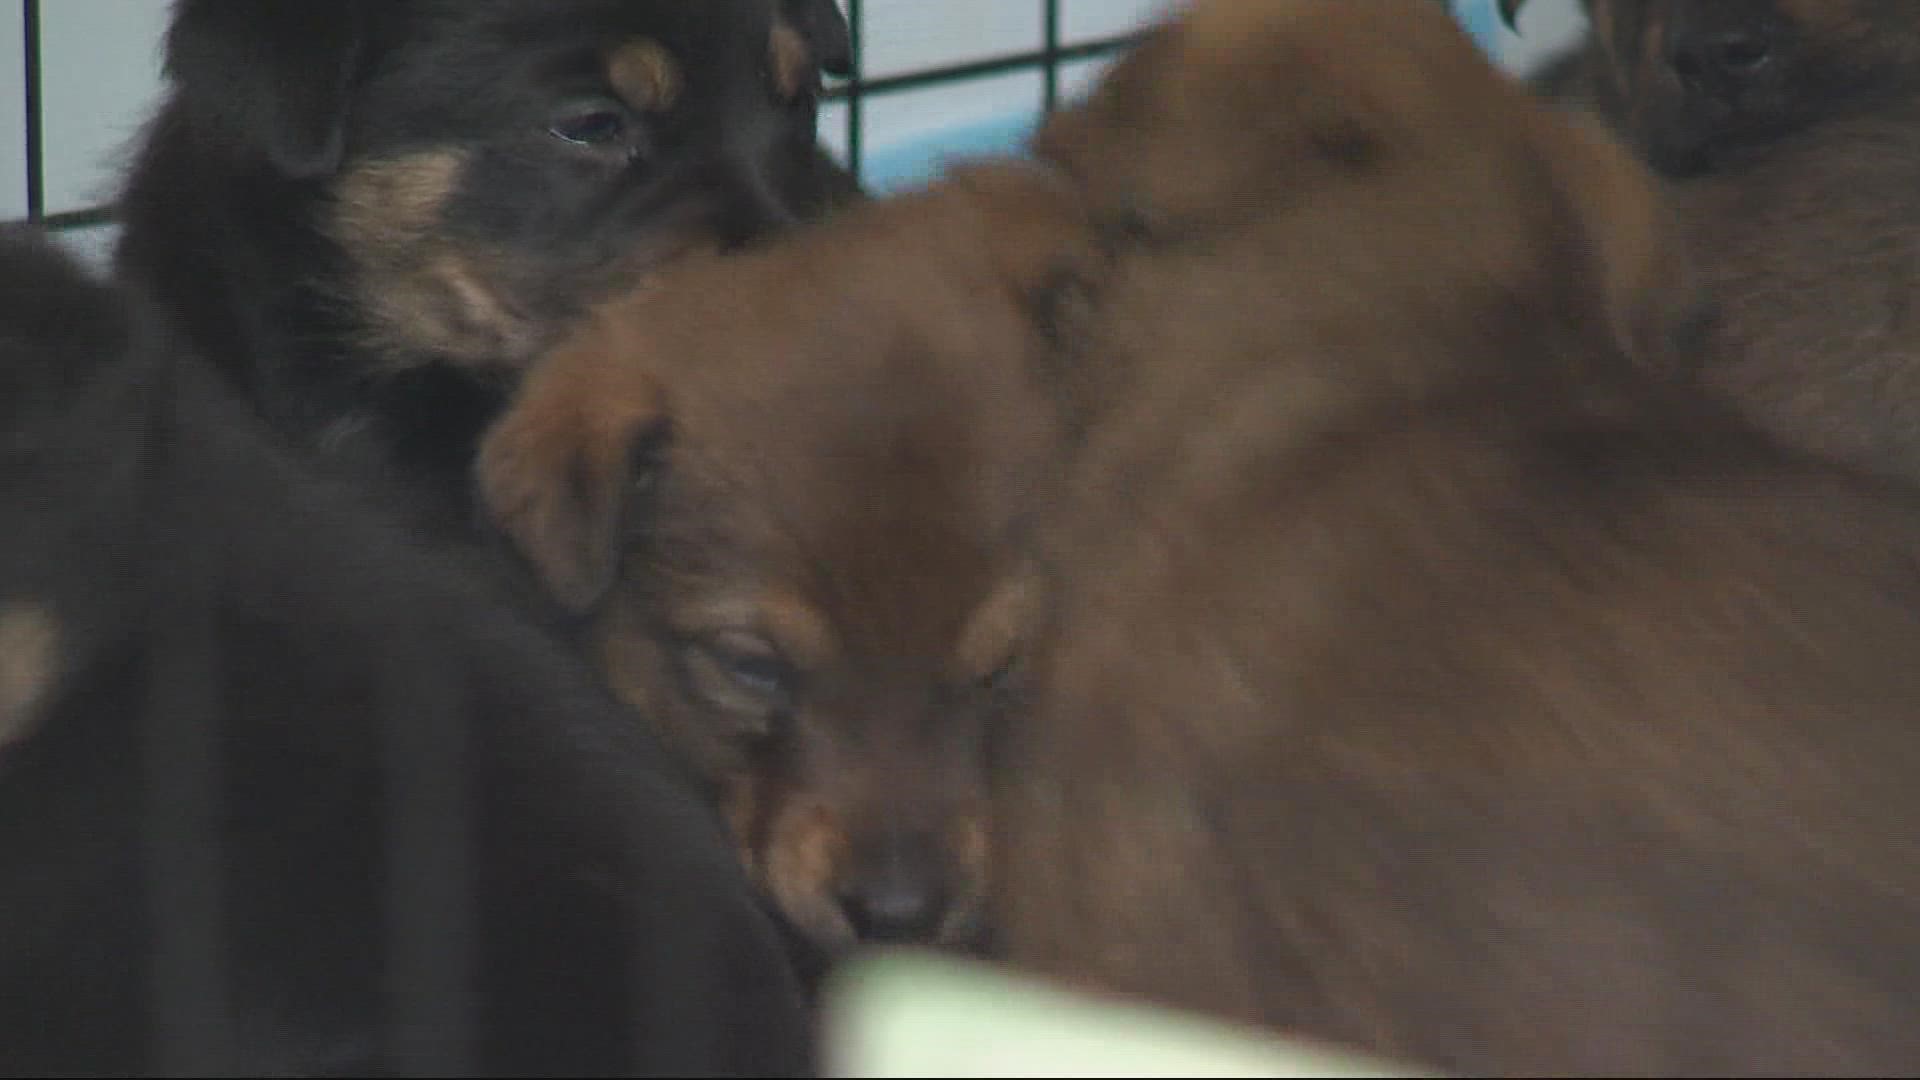 A man who is homeless thought his dog was fixed, then she had 7 puppies. The Humane Society is making sure the dogs are cared for and adopted.